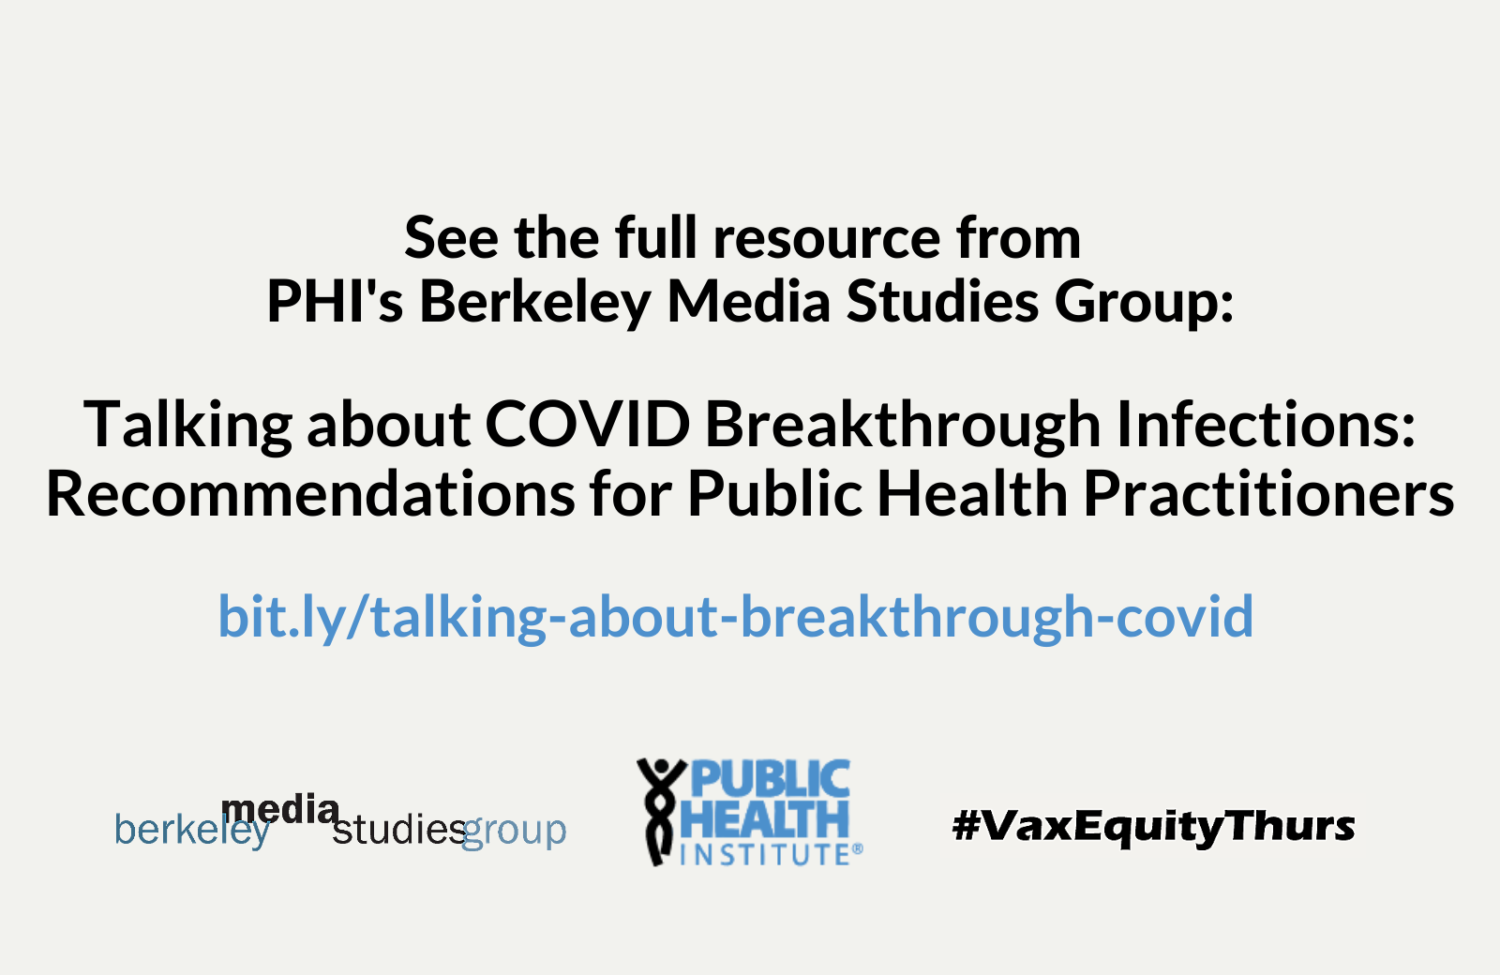 See the full resource from PHI's BMSG: Talking about COVID Breakthrough Infections: Recommendations for Public Health Practitioners